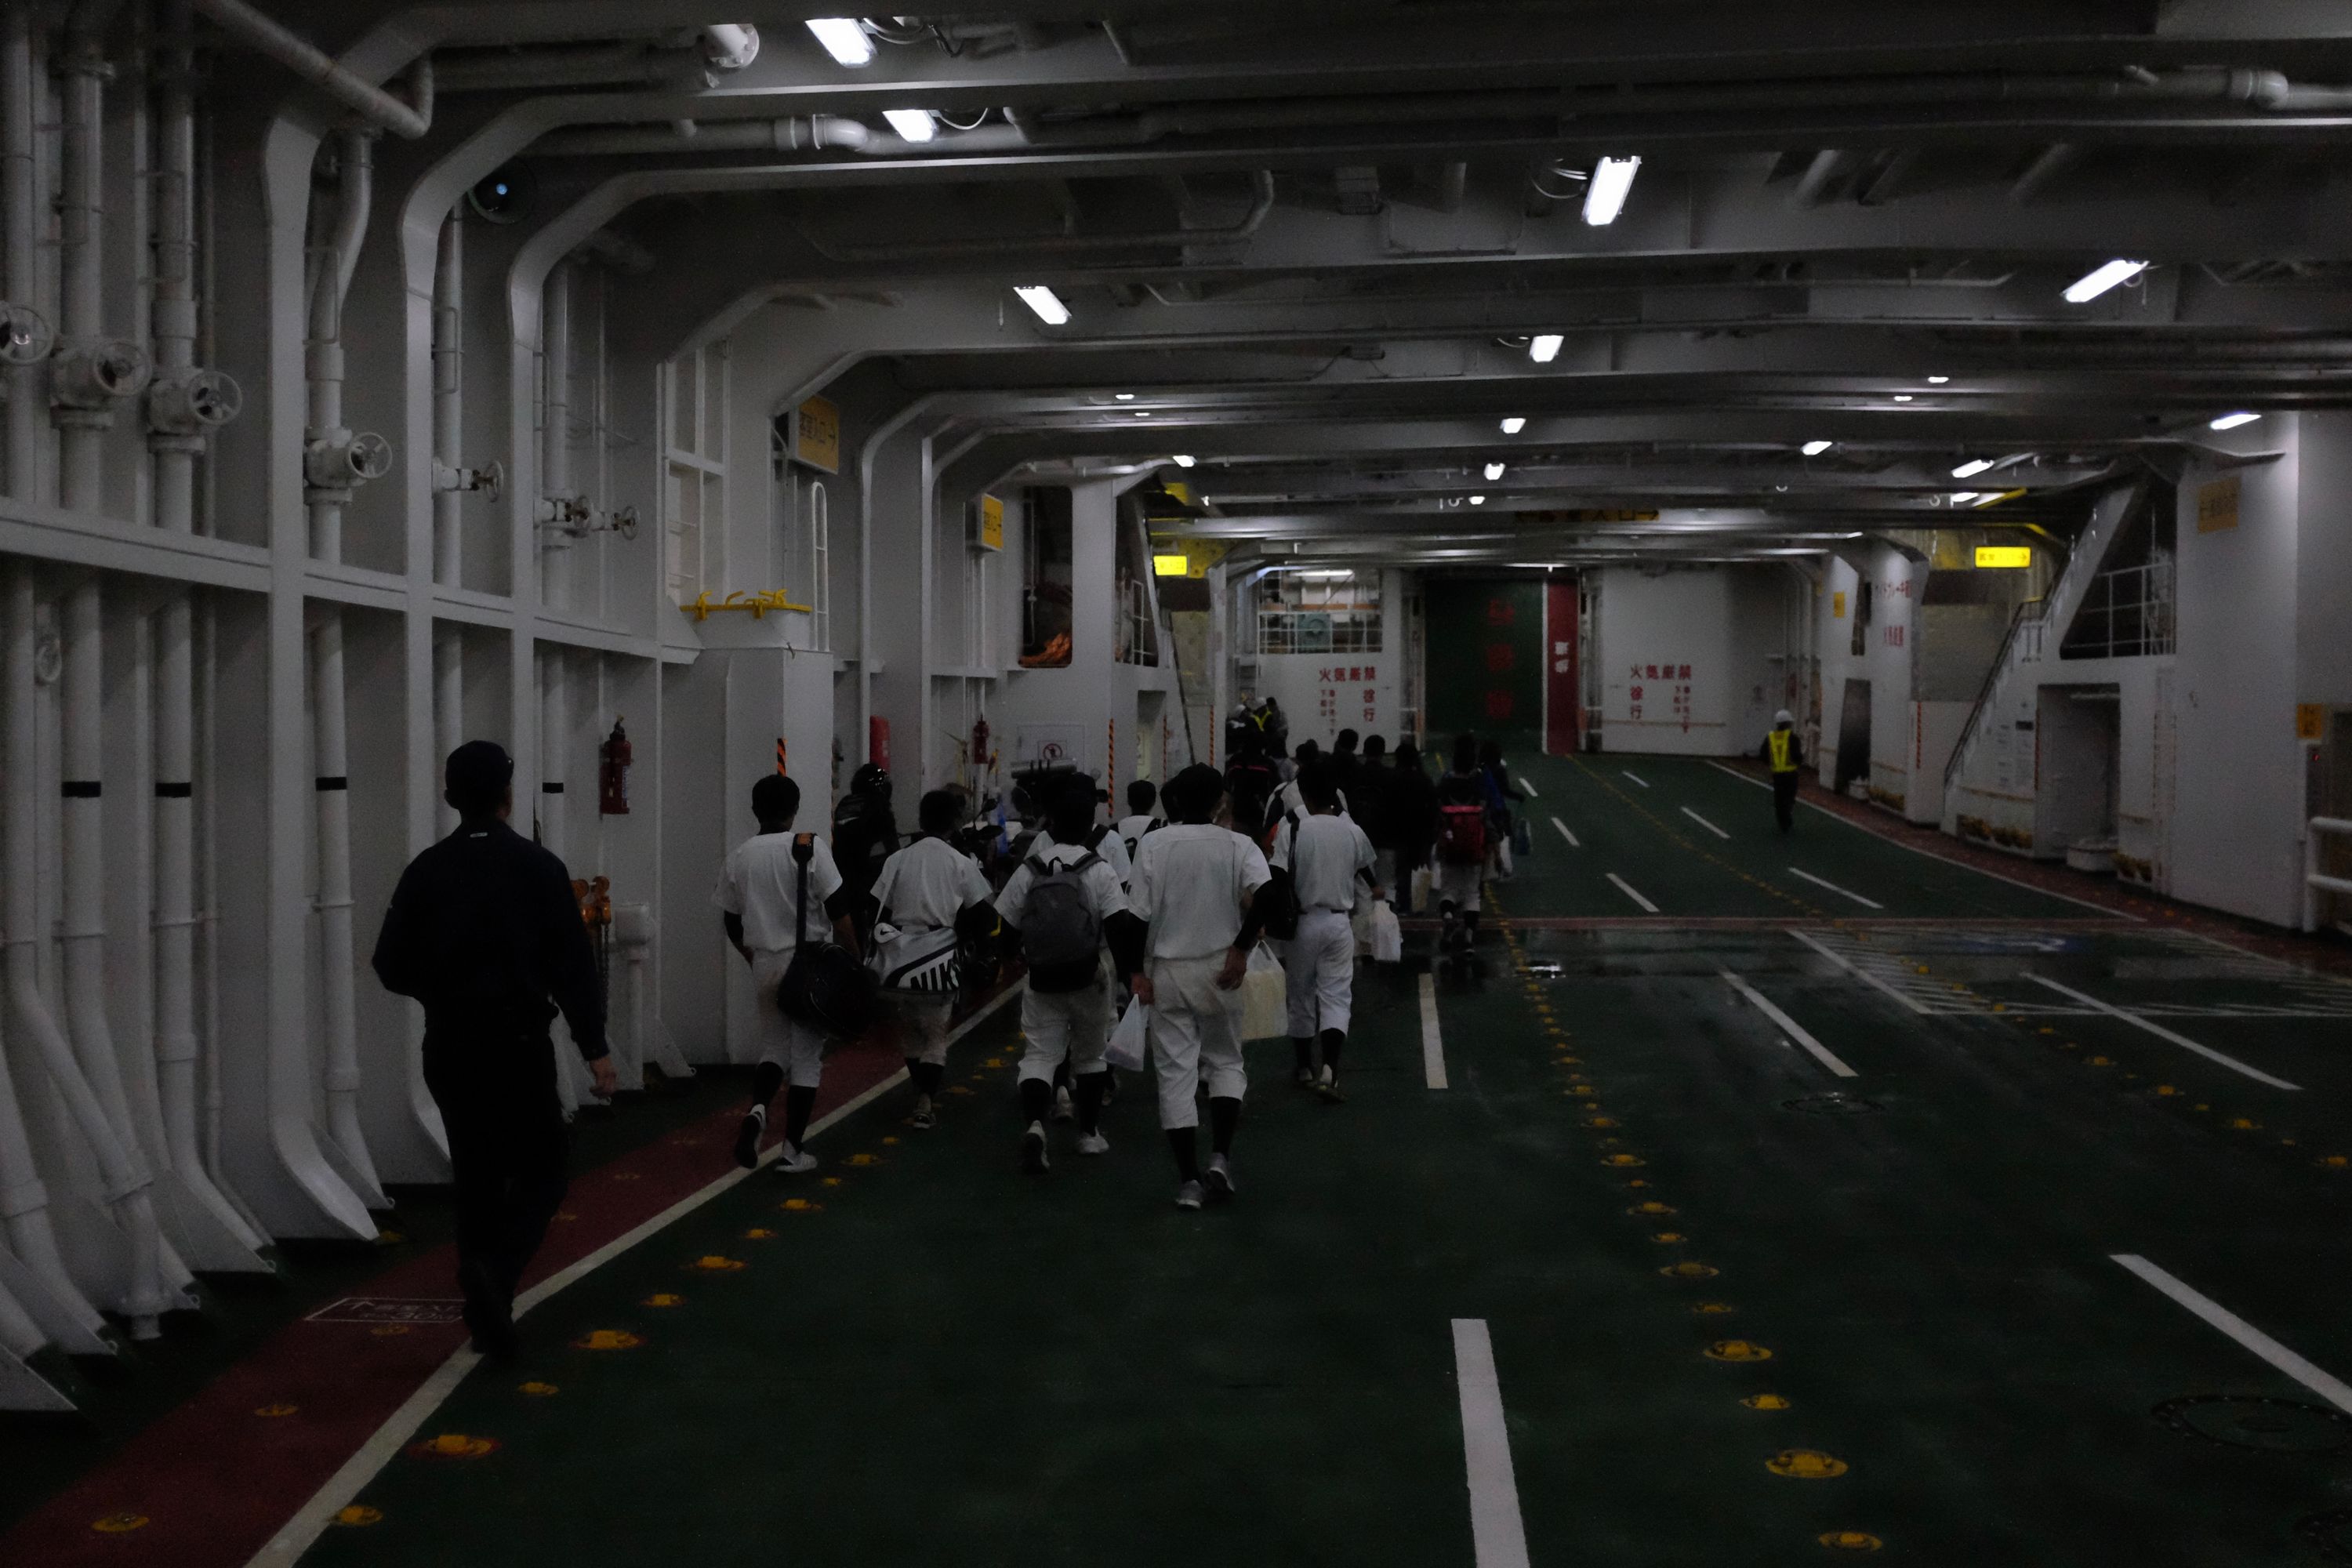 A group of boys in baseball uniforms walk through the car deck of the ferry.